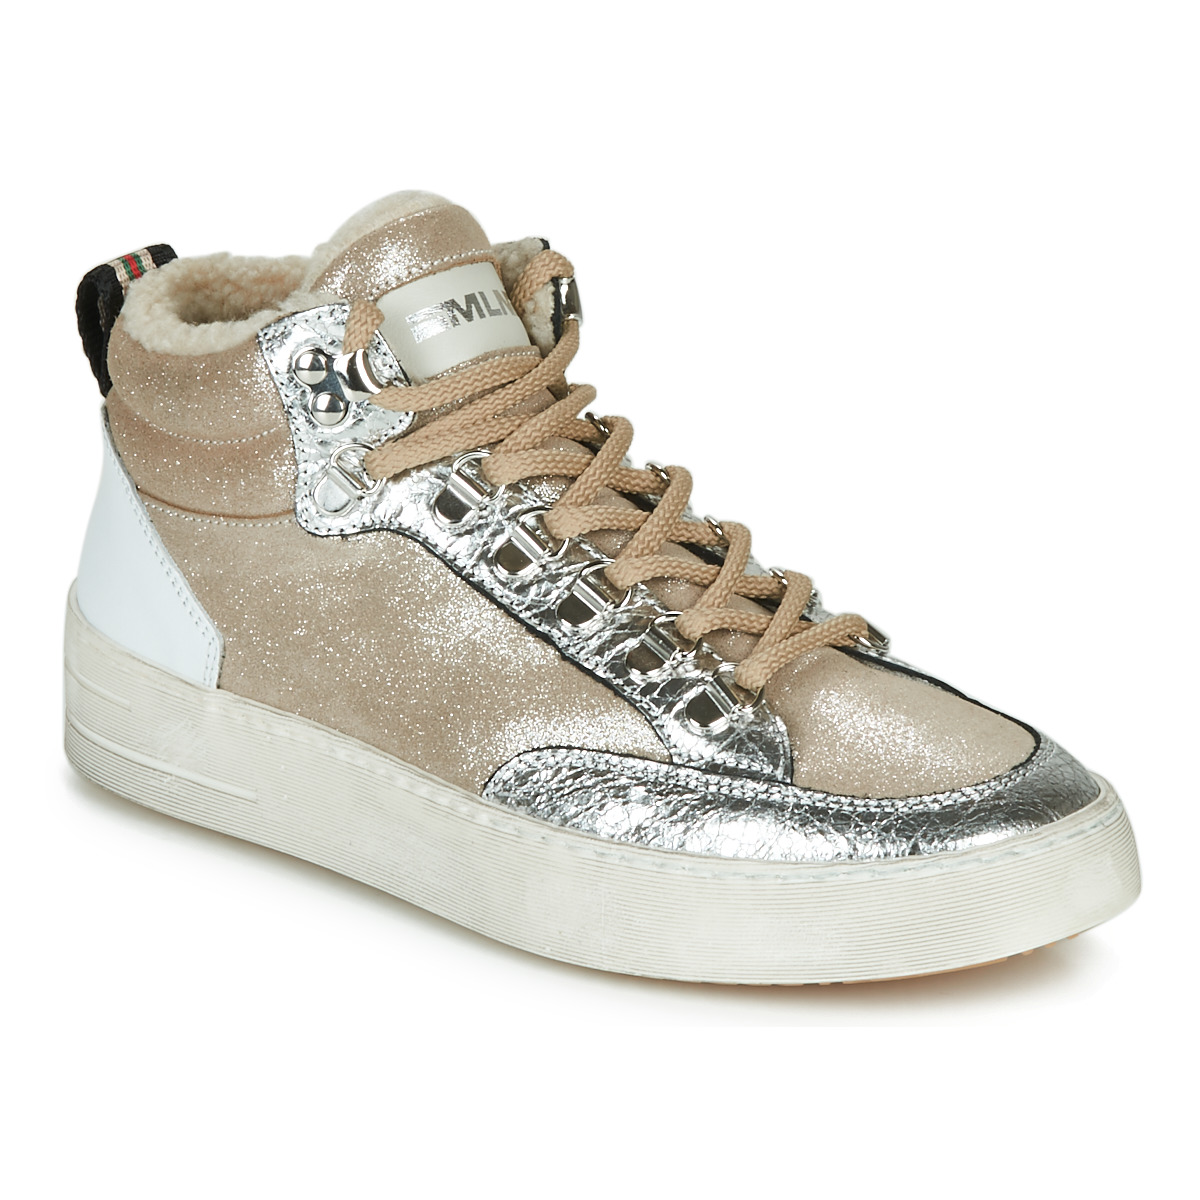 Shoes Women Hi top trainers Meline STRA5056 Beige / Gold